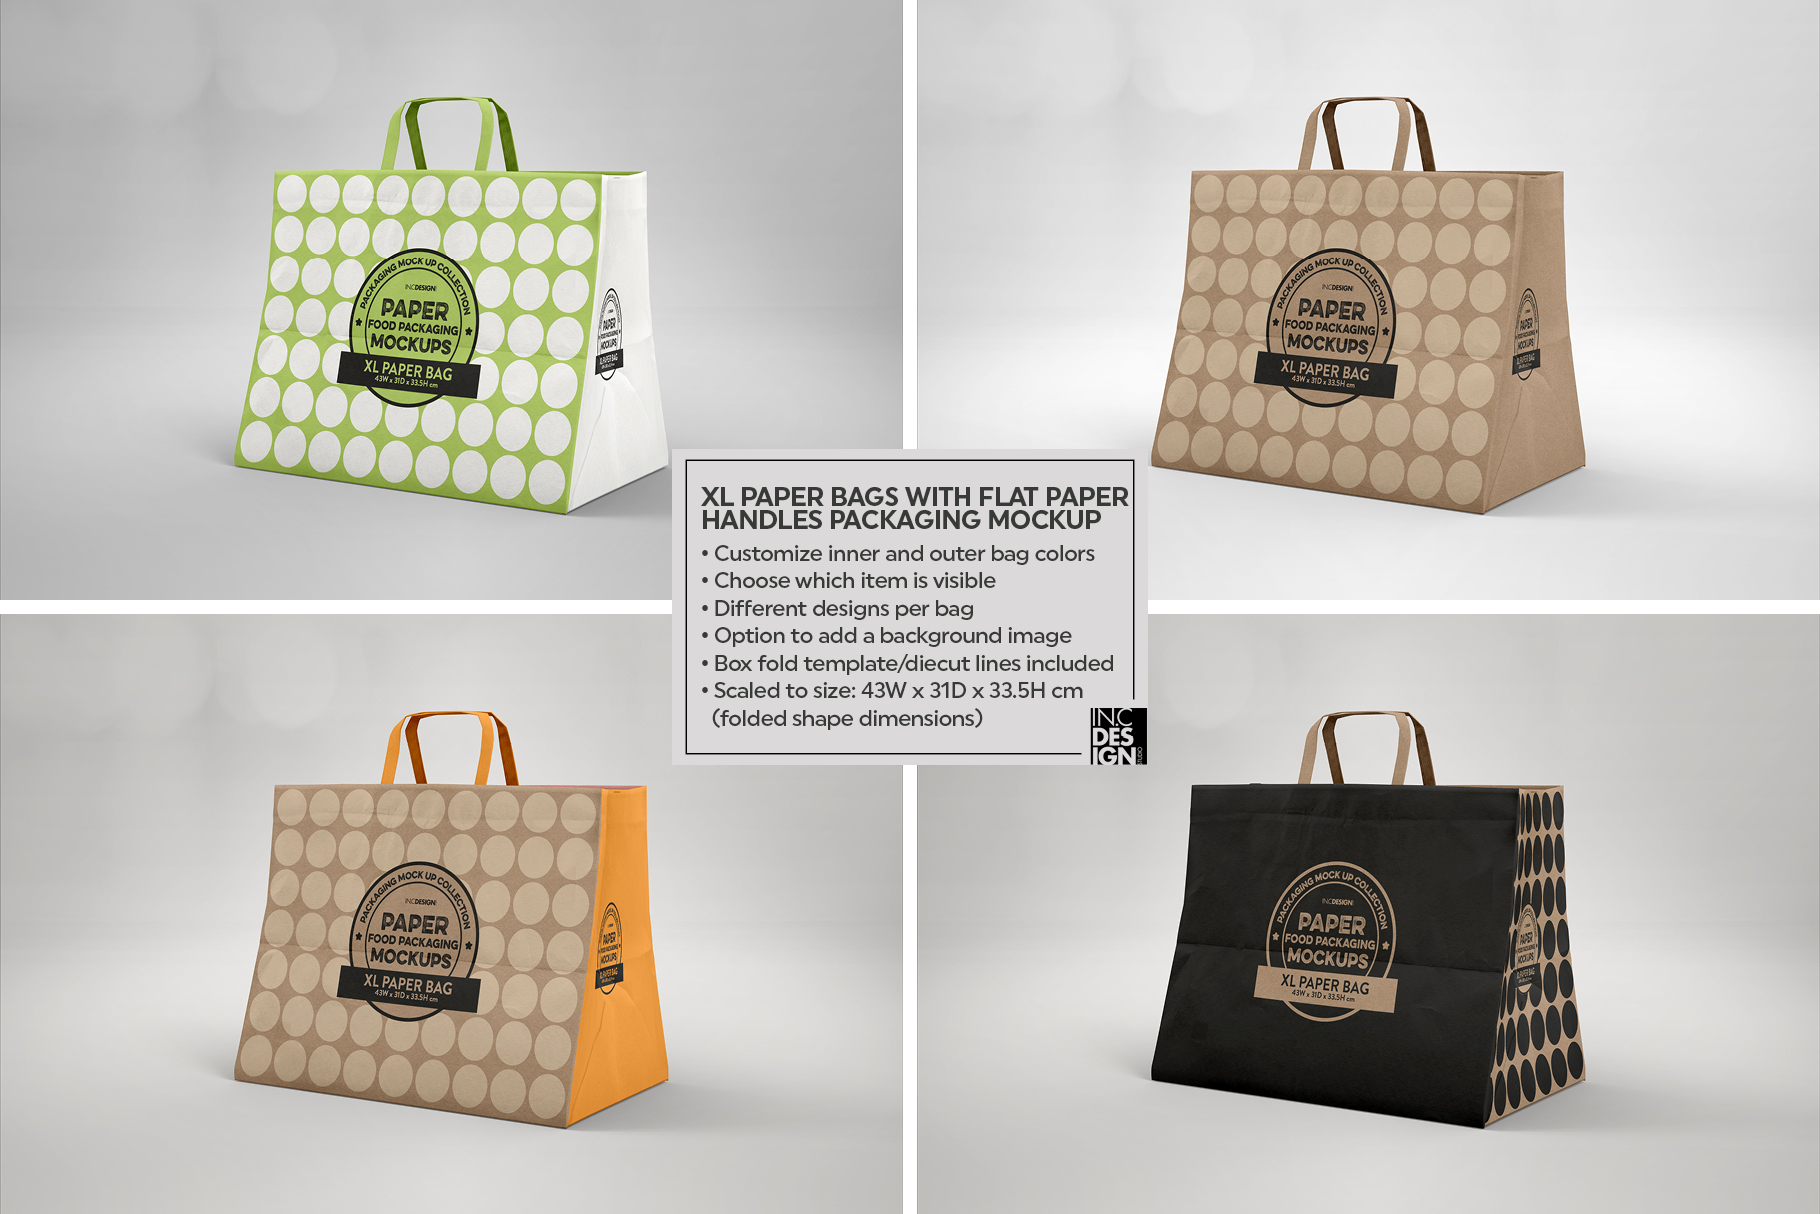 XL Paper Bag with Flat Handles Packaging Mockup (284096 ...